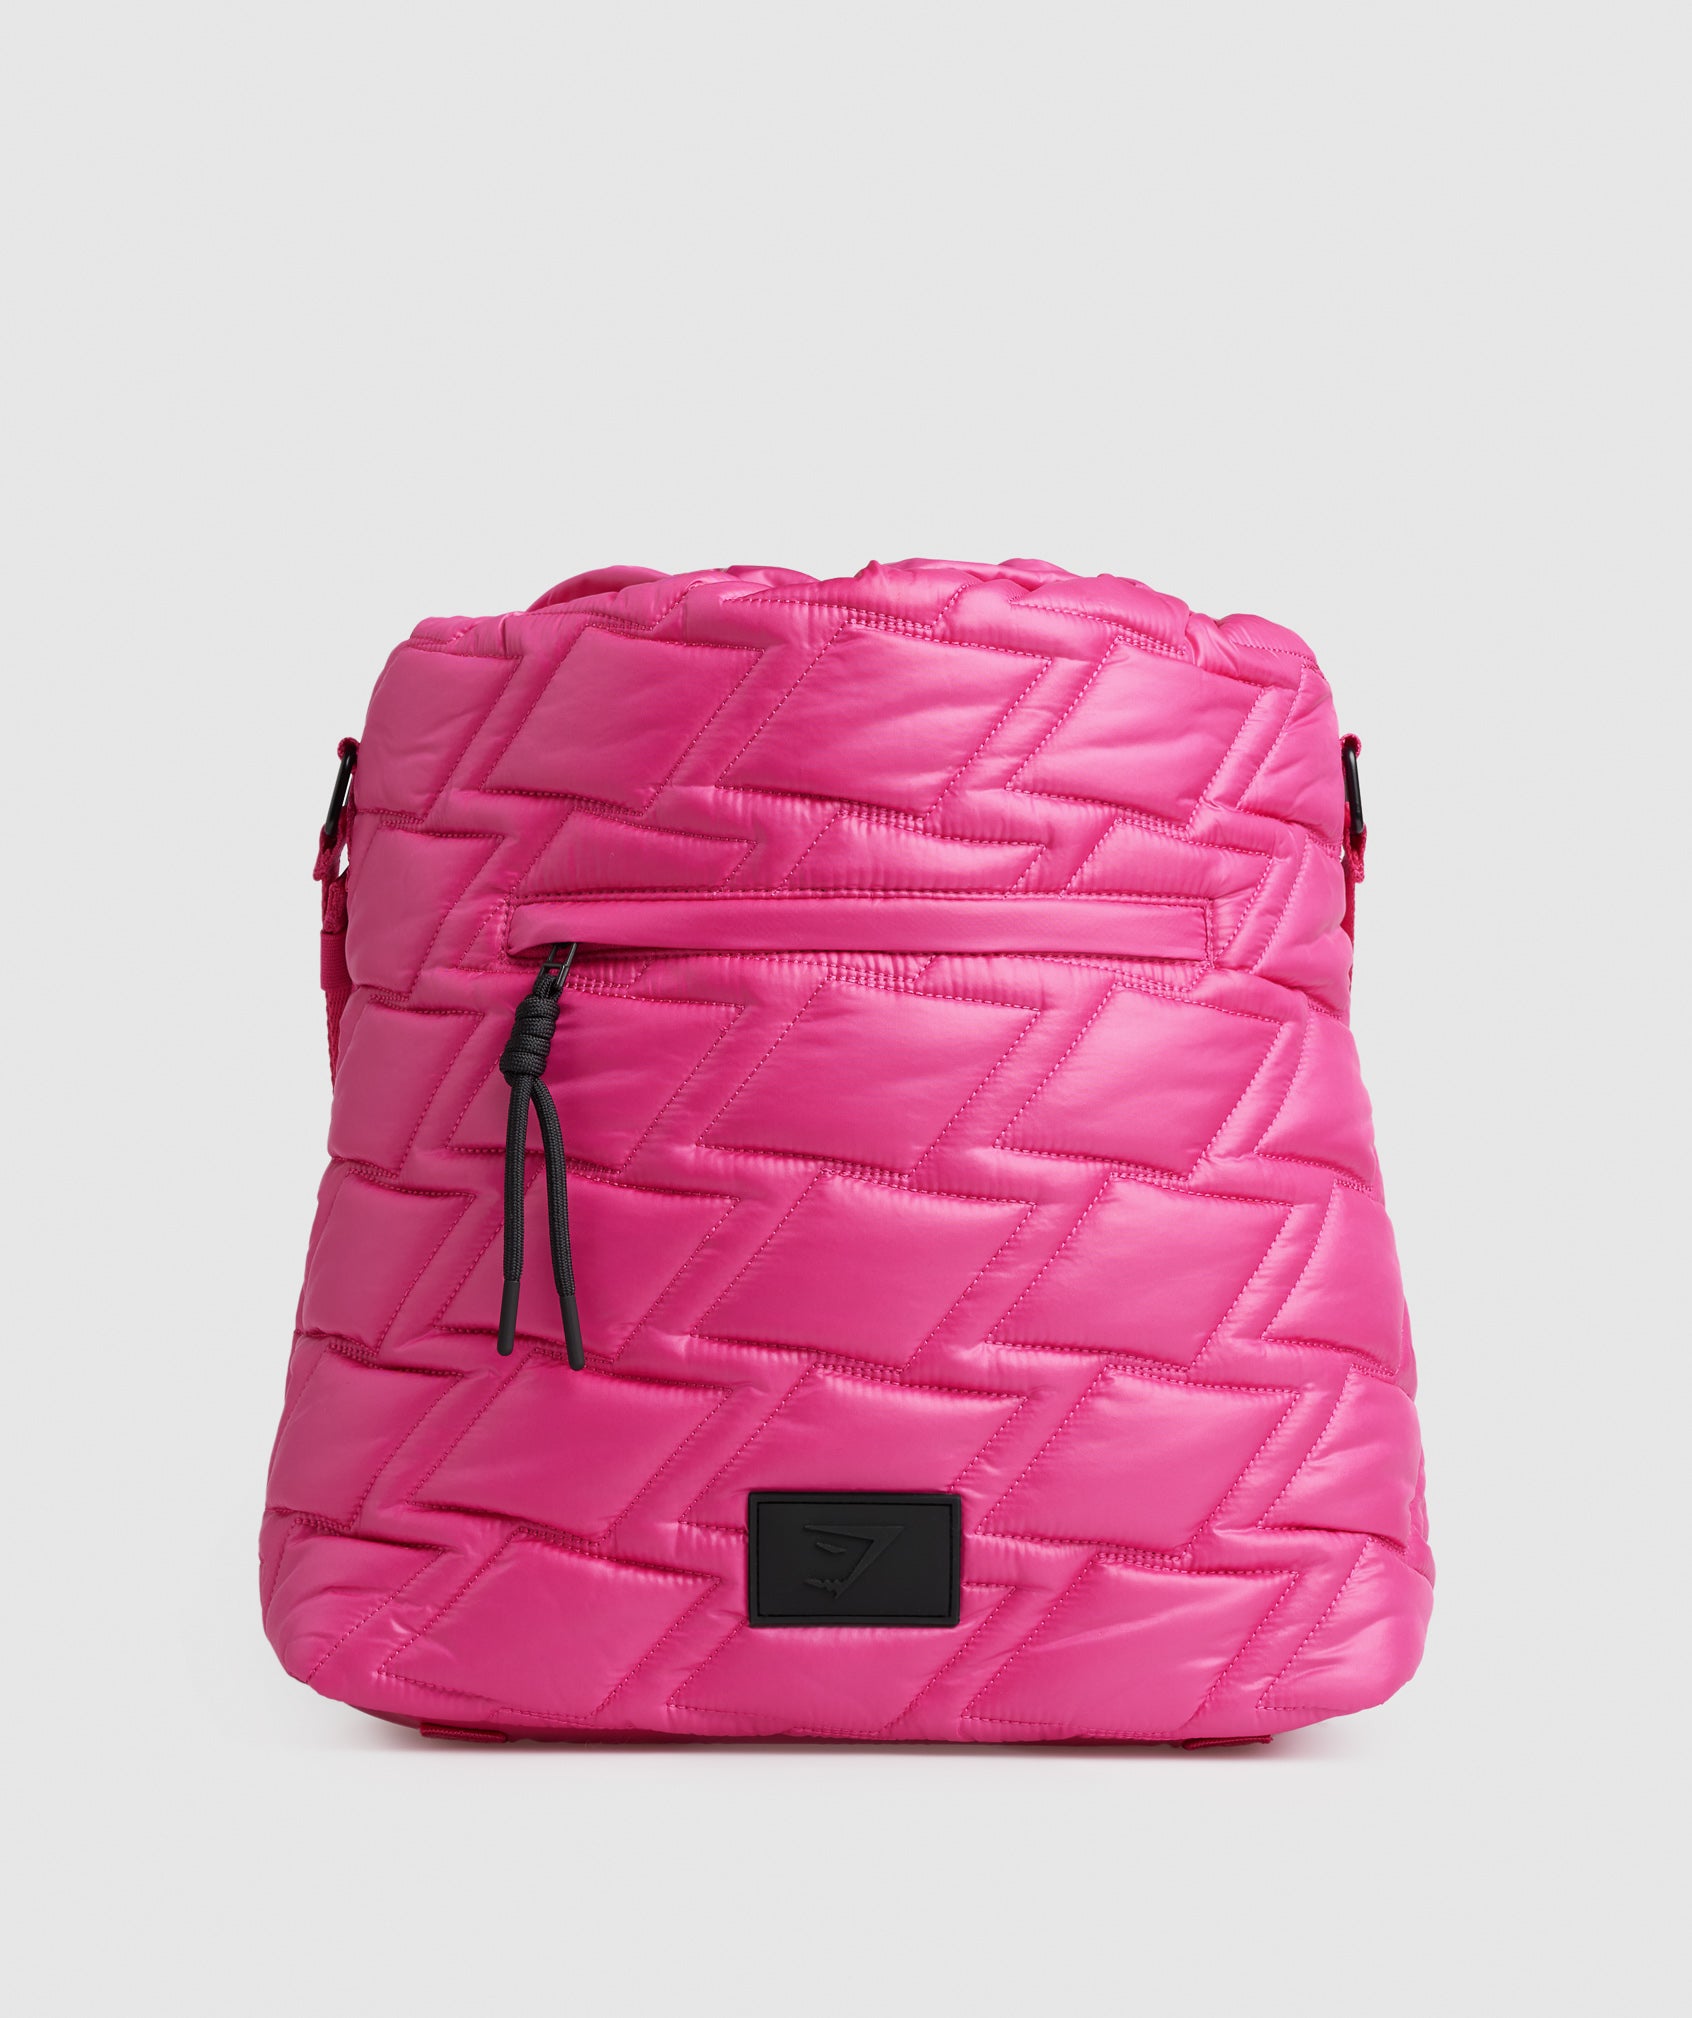 Quilted Yoga Tote in Bold Magenta - view 2